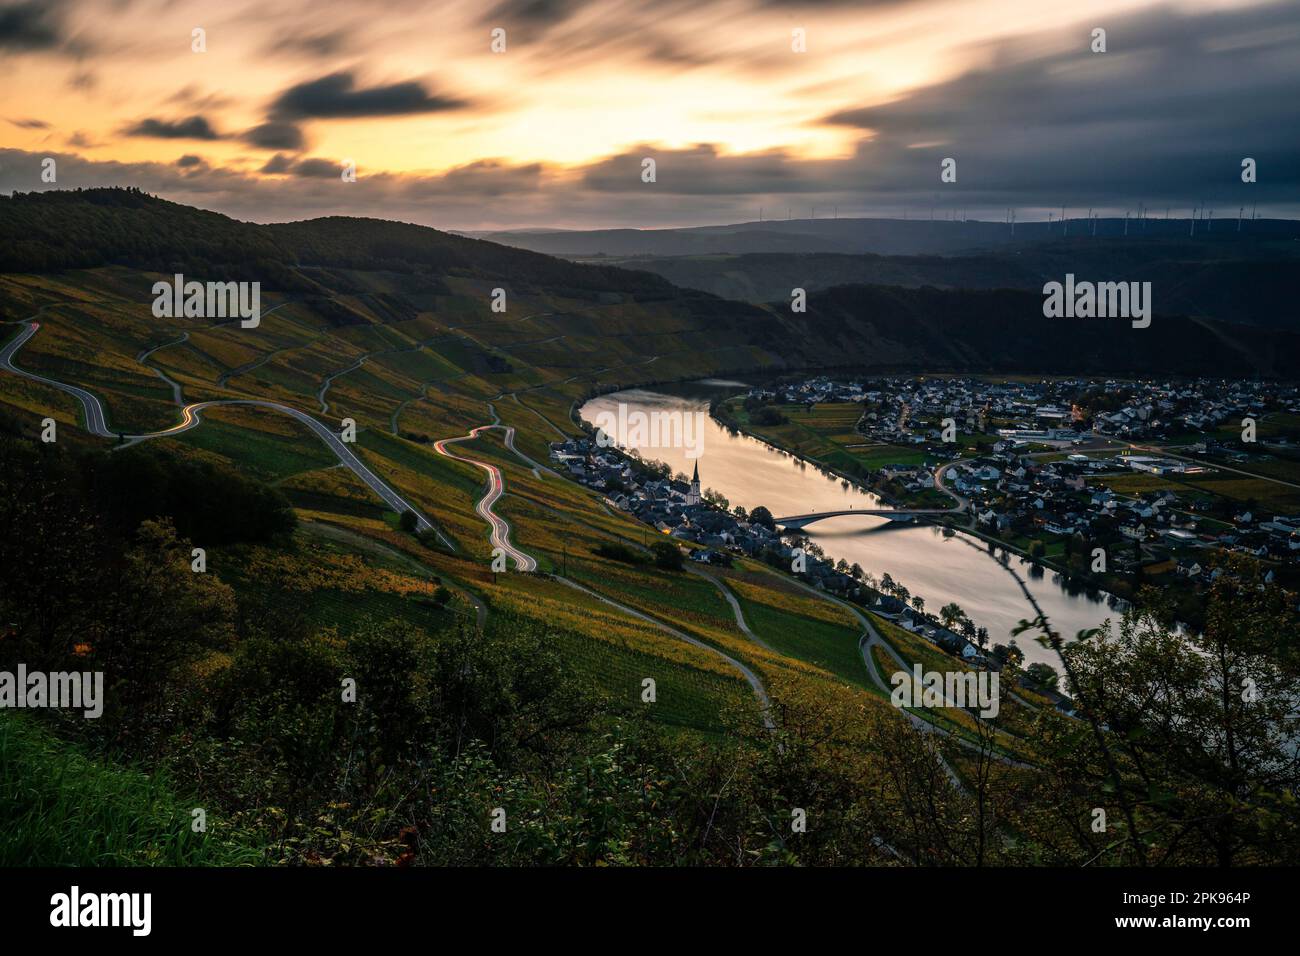 Piesport on the Moselle river, beautiful view over the Moselle valley in autumn with yellow vineyards. Germany Stock Photo